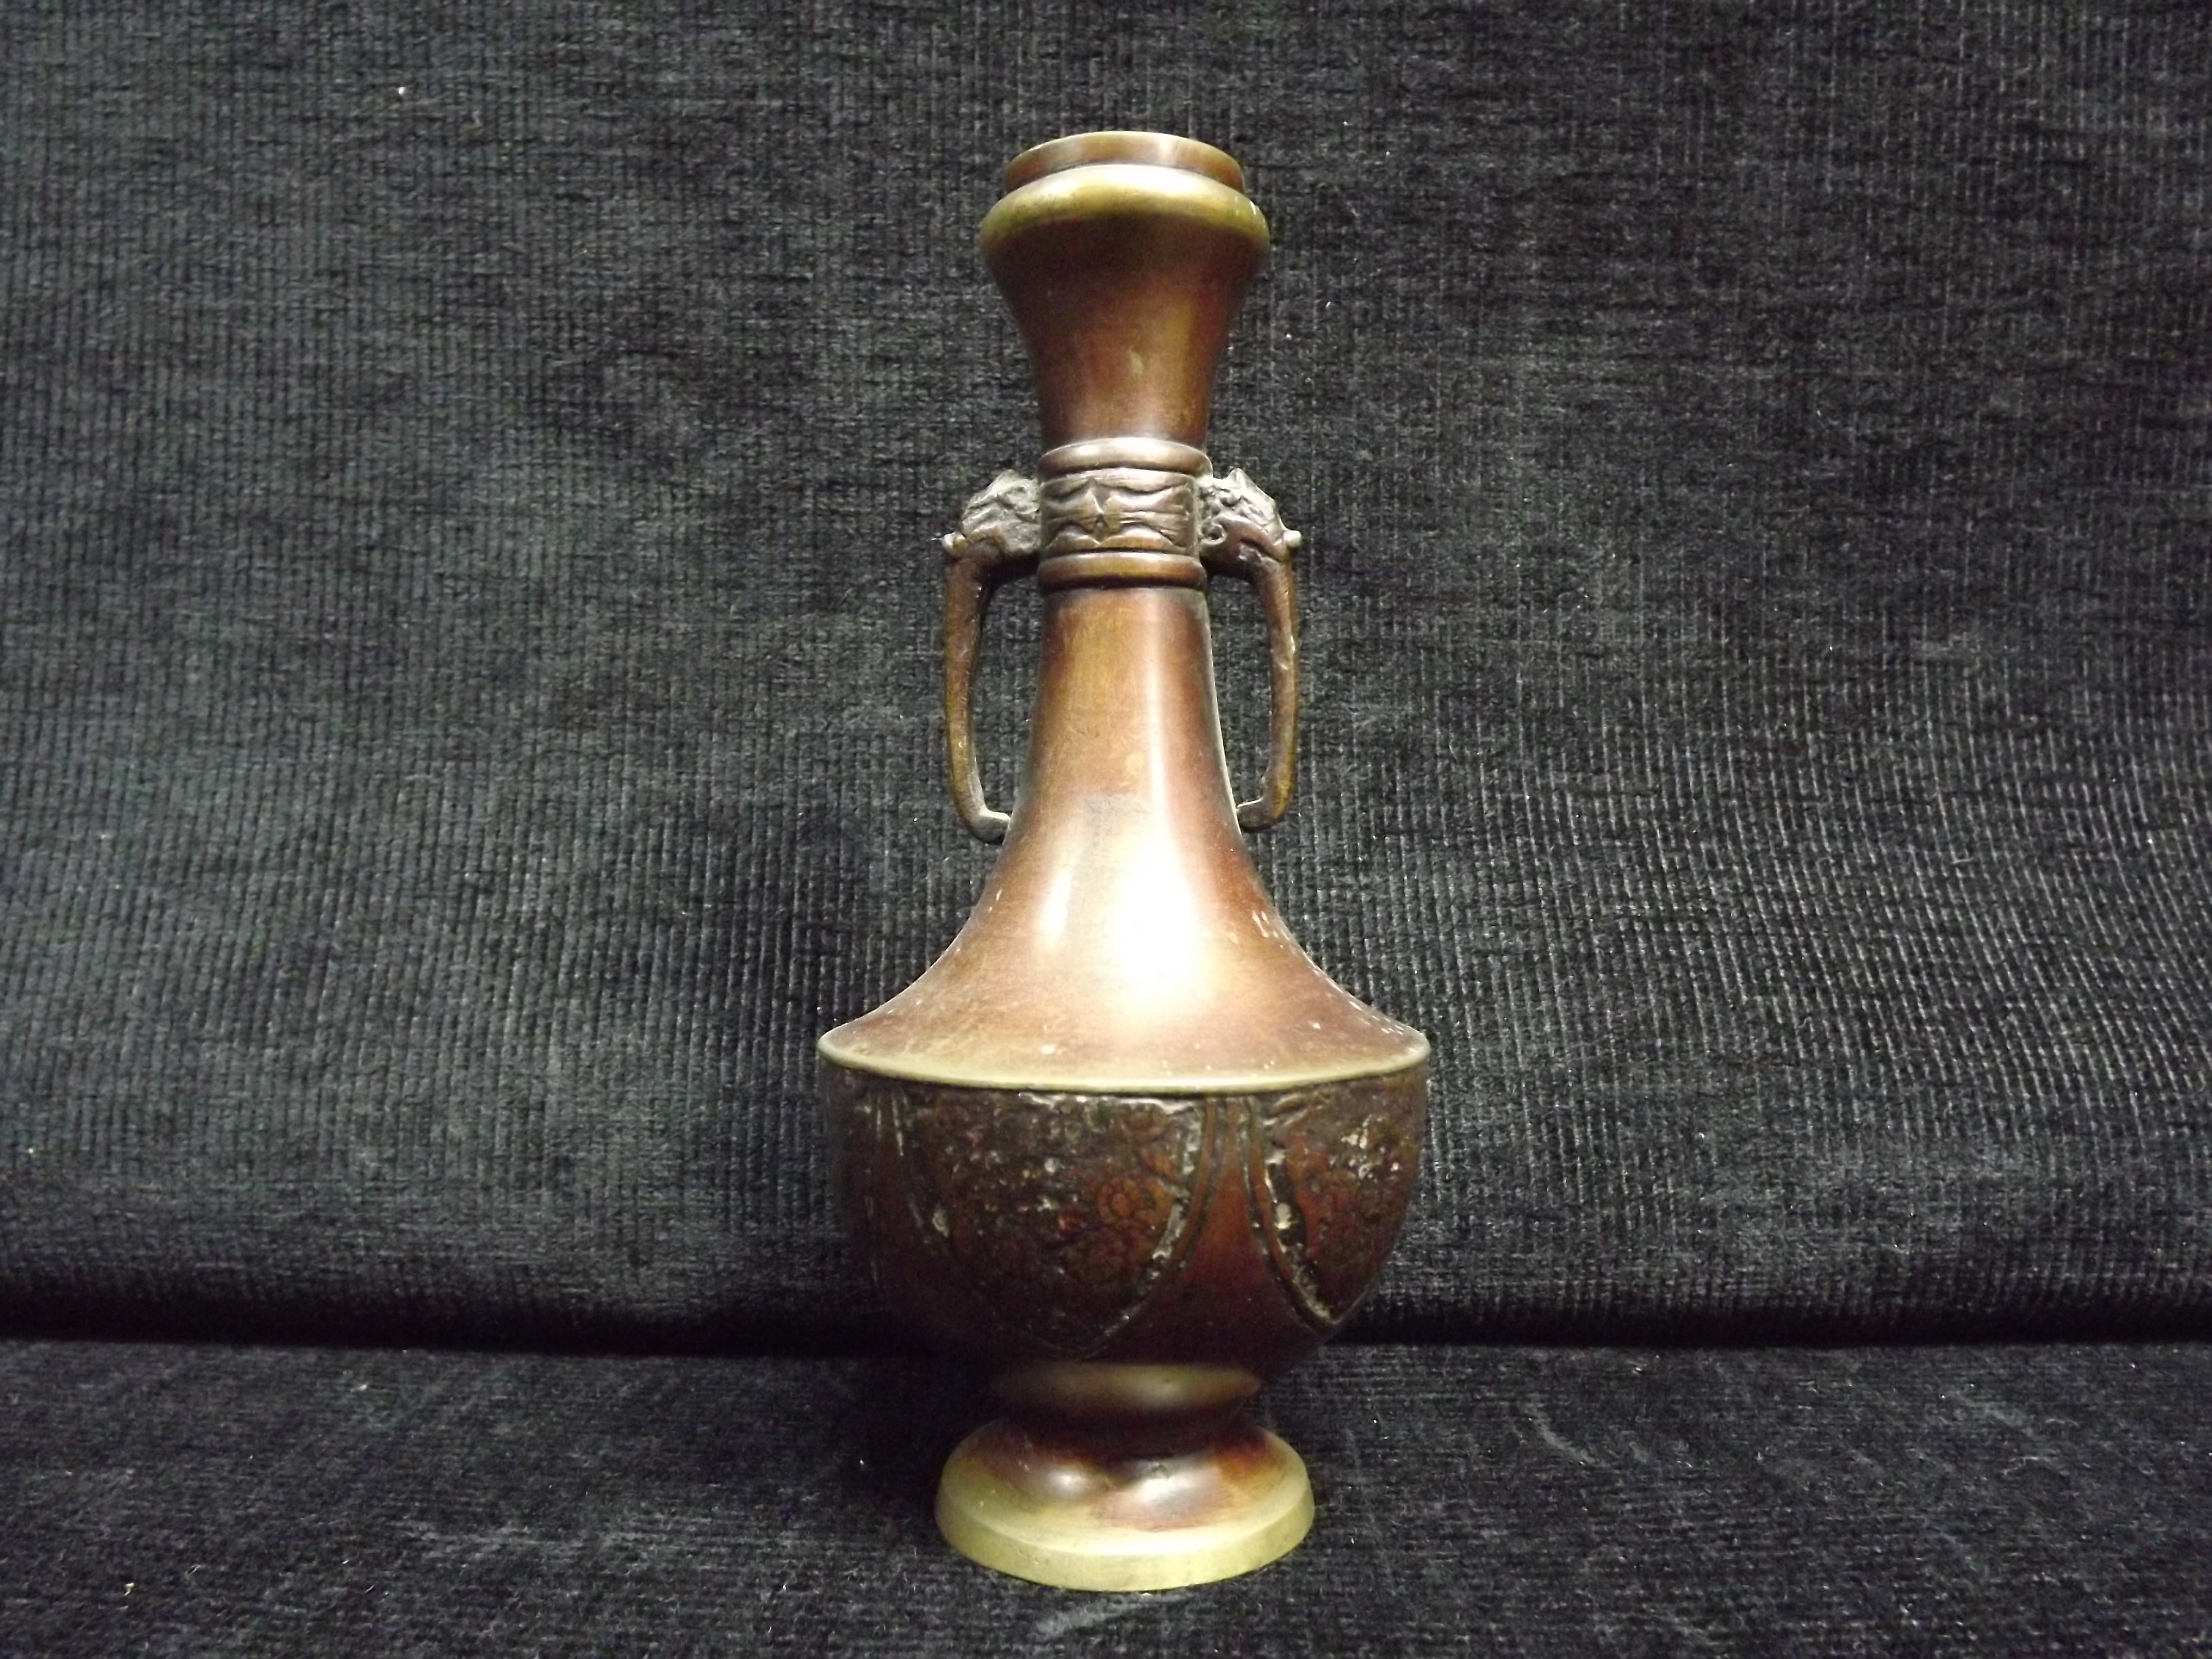 Chinese Small Copper Bronze Bud Vase. Elephant handles and Flowers in the Panels. Some age related